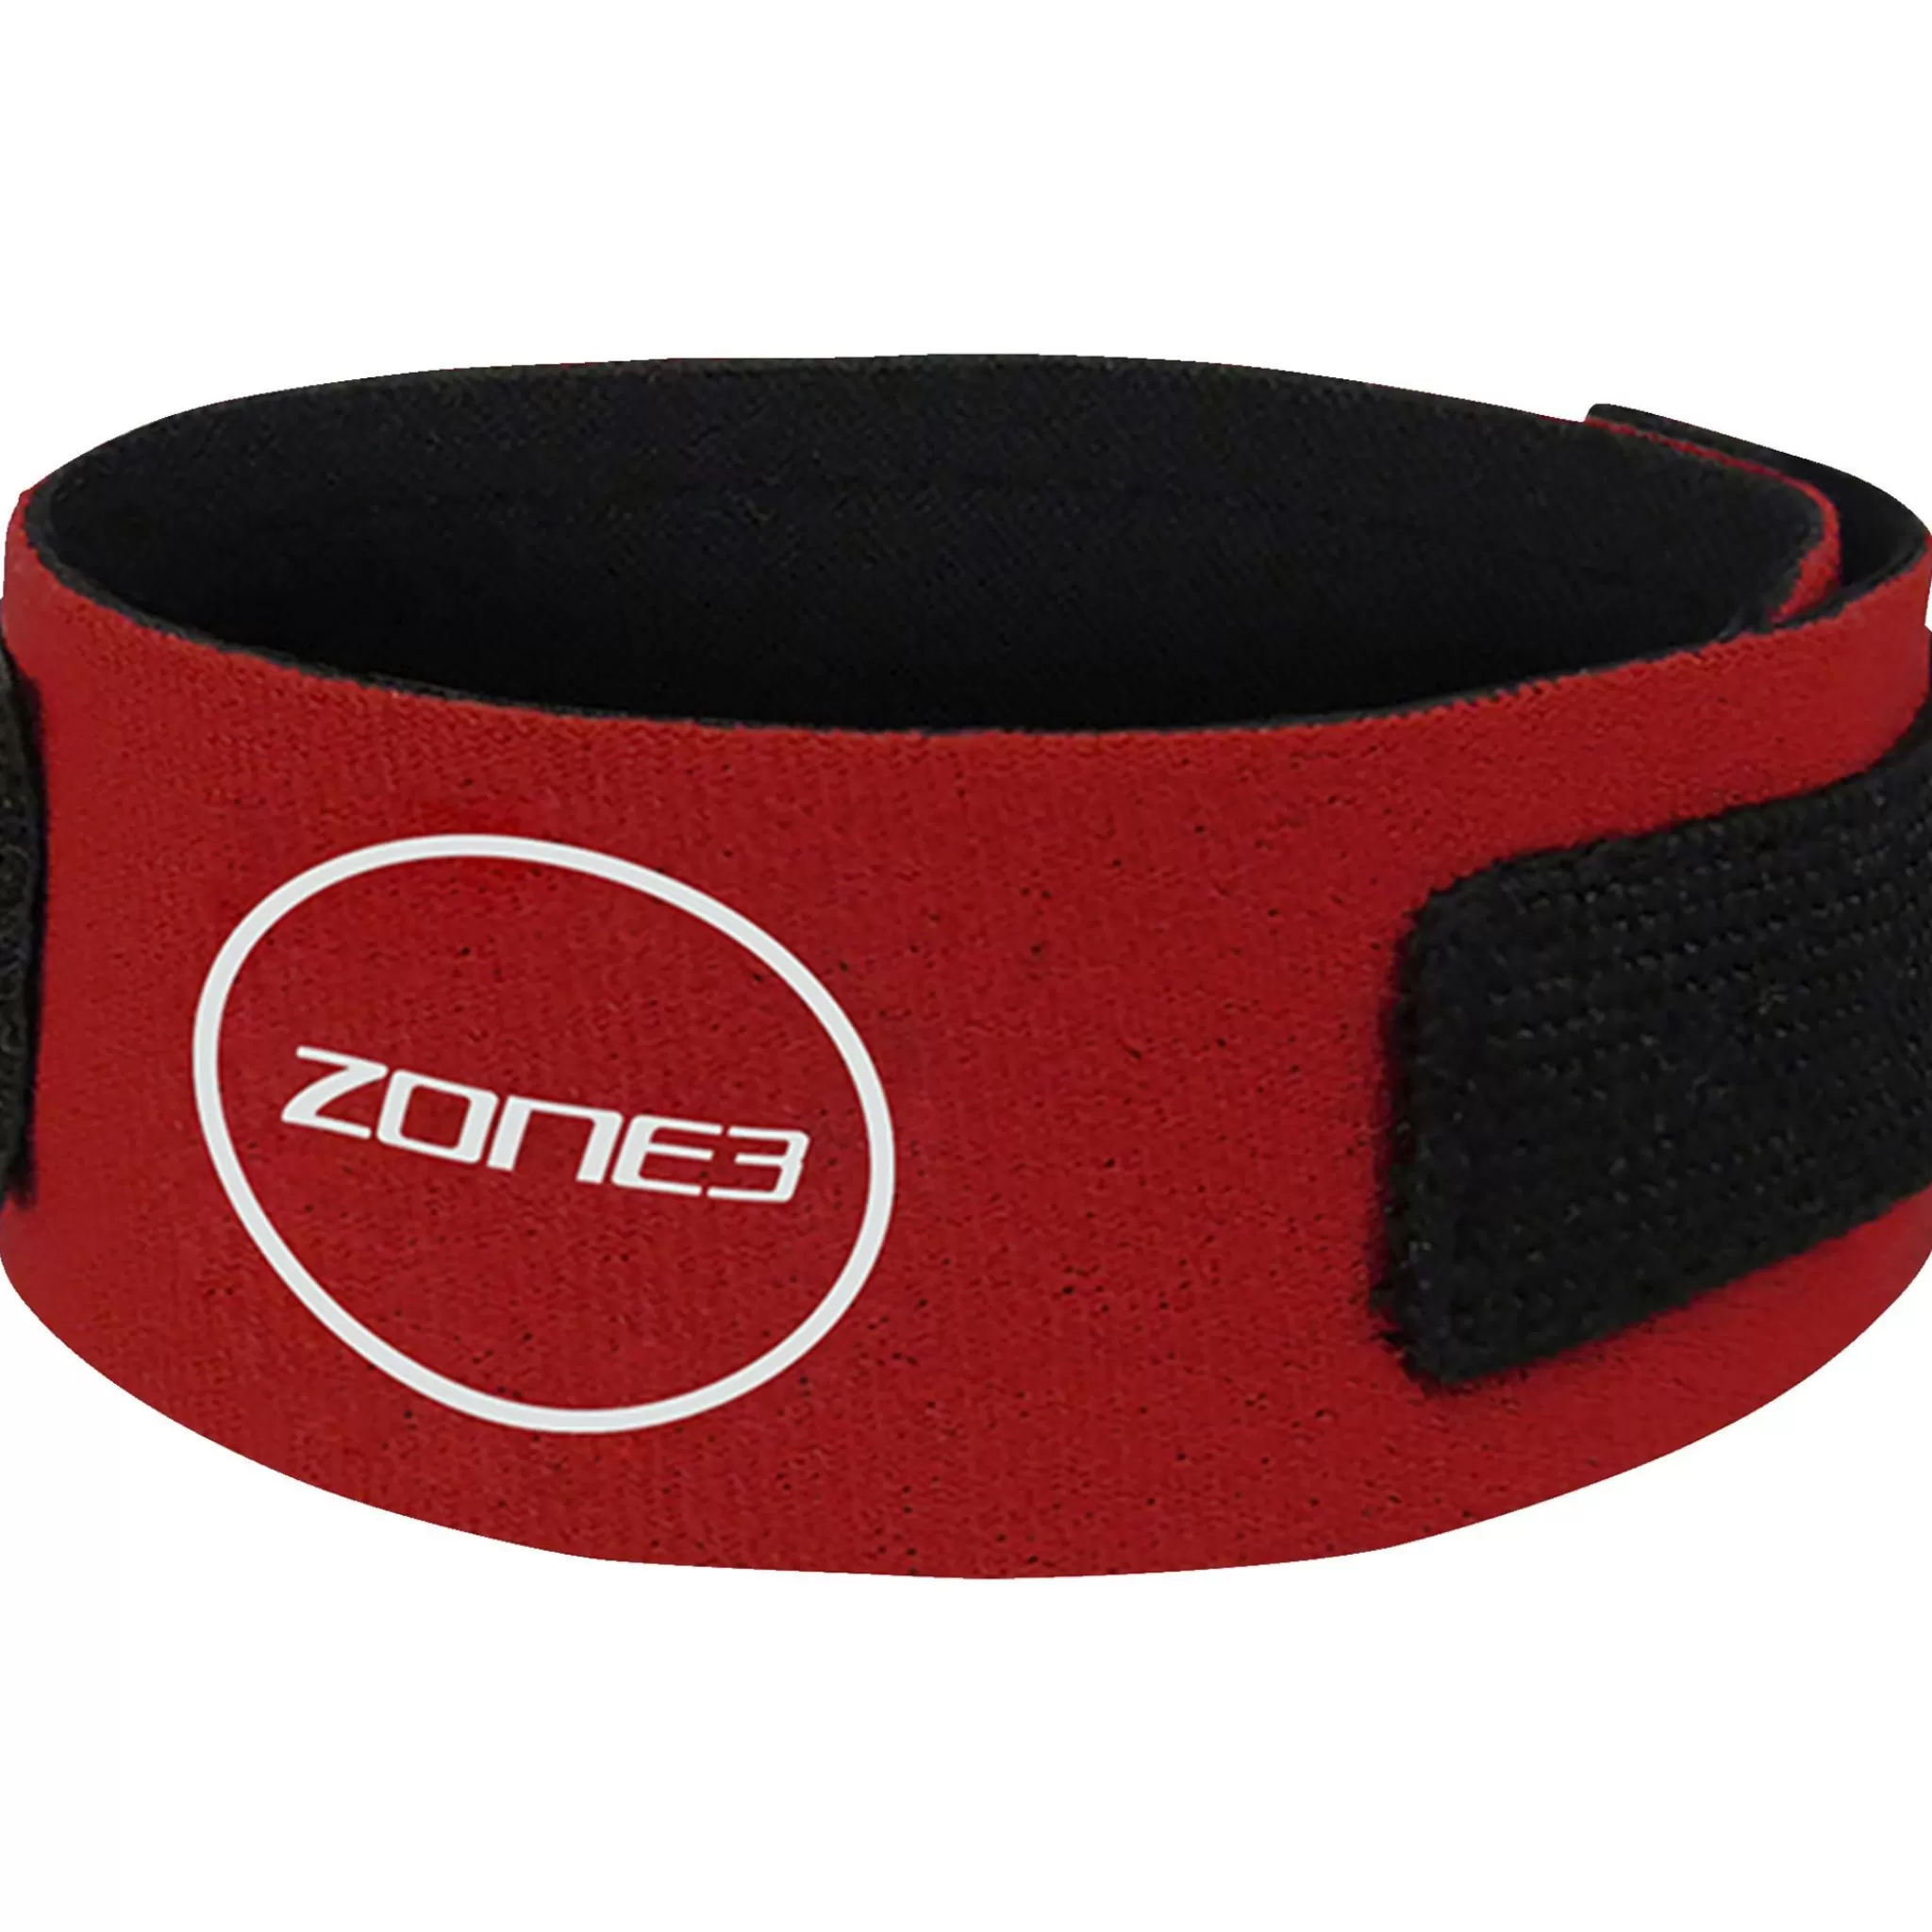 Outlet Zone3 Neoprene Timing Chip Strap